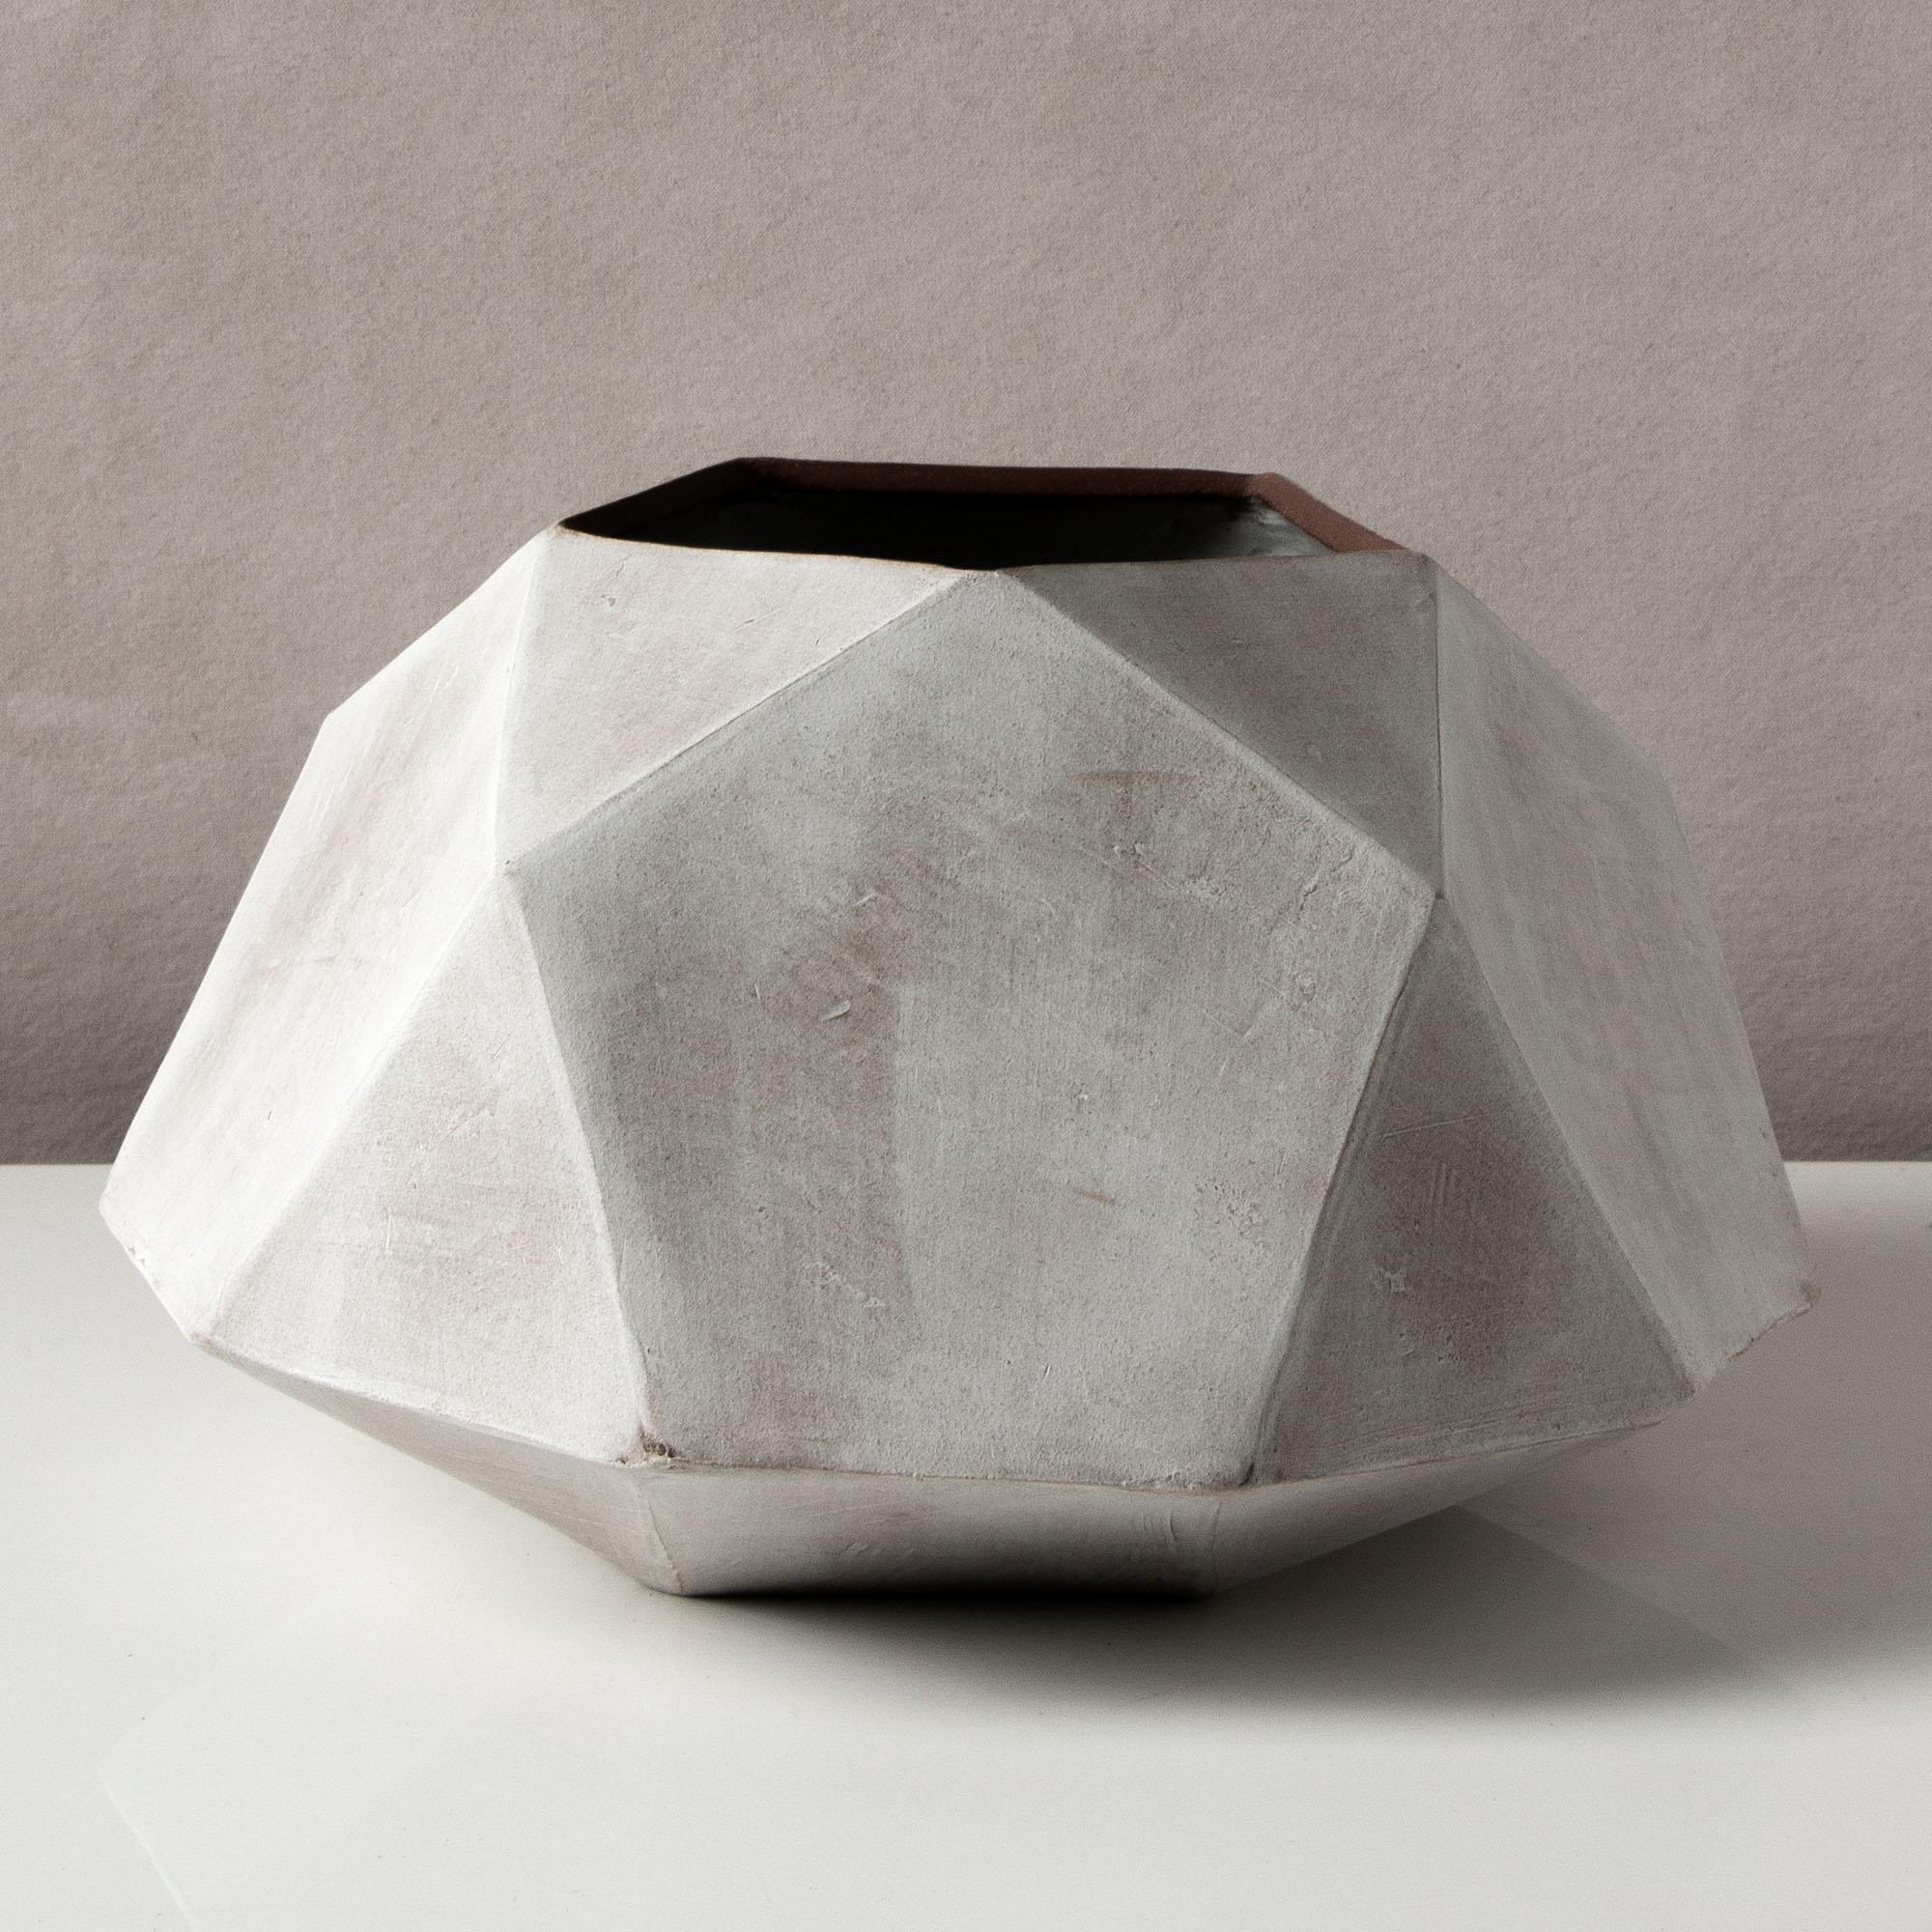 This dramatic ceramic vessel combines clean geometric lines with the warmth and individuality inherent in handmade work; use as a planter or simply as a statement piece. Each vessel is assembled individually from flat sheets of a rich red-brown